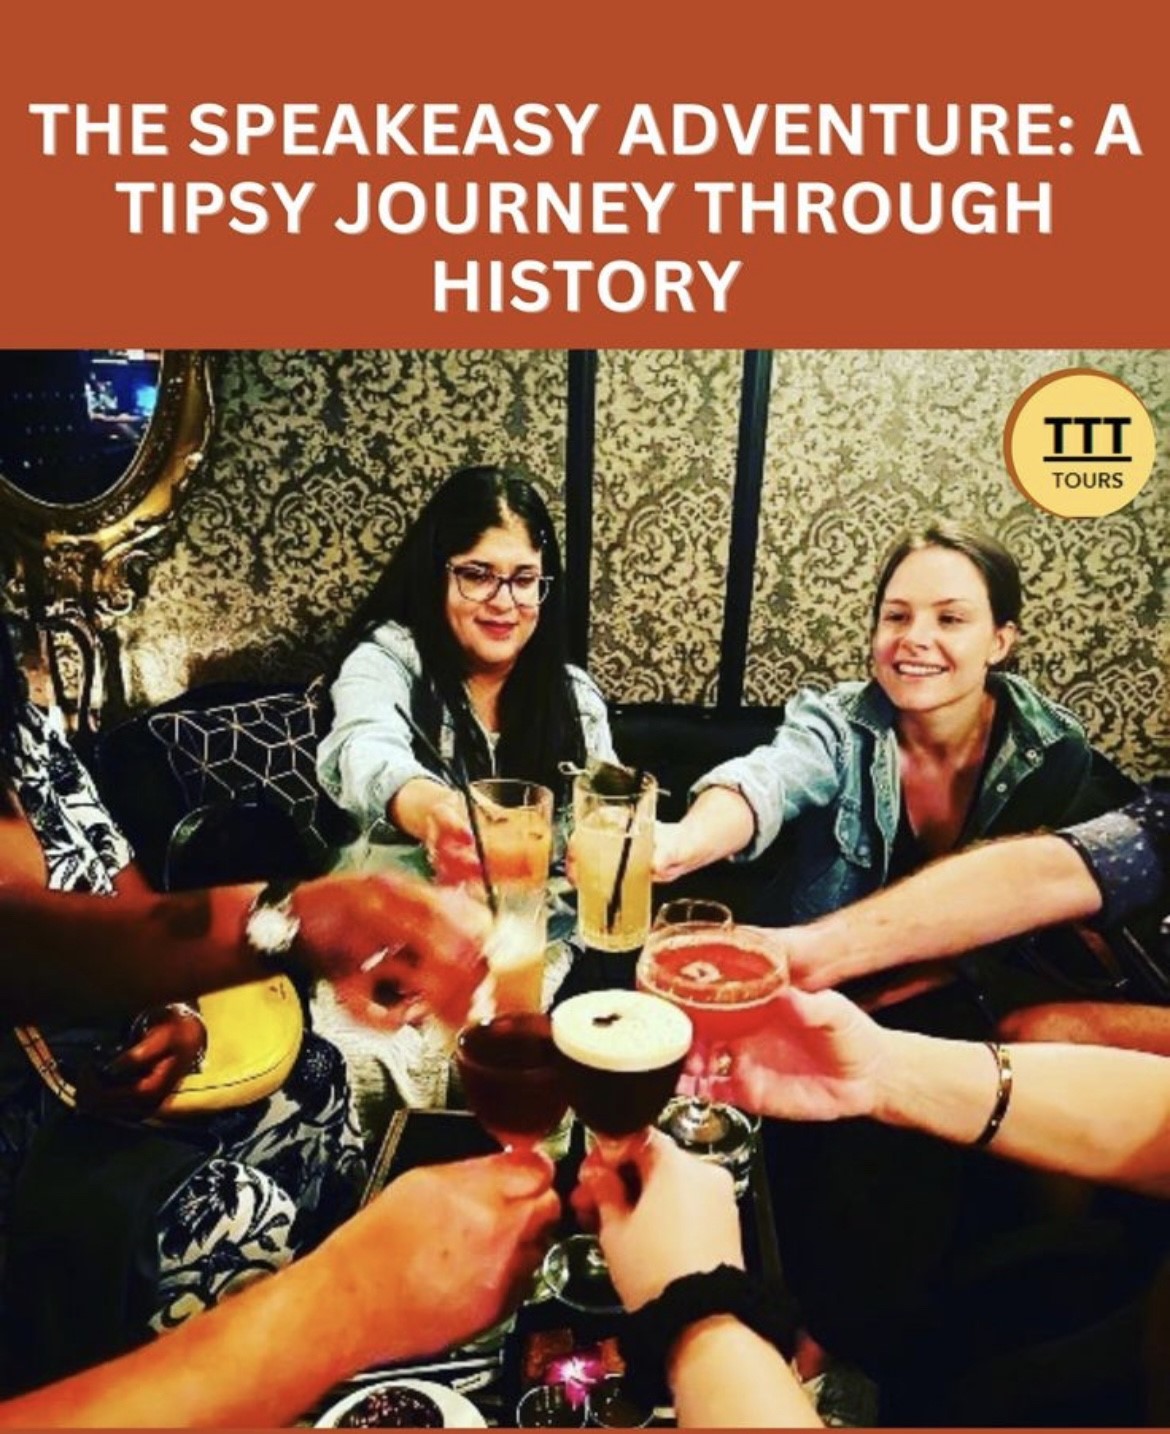 The Speakeasy Adventure: A Tipsy Trip Through History  on Jan 01, 00:00@Cravath Swaine and Moore - Buy tickets and Get information on Telltale Tours 